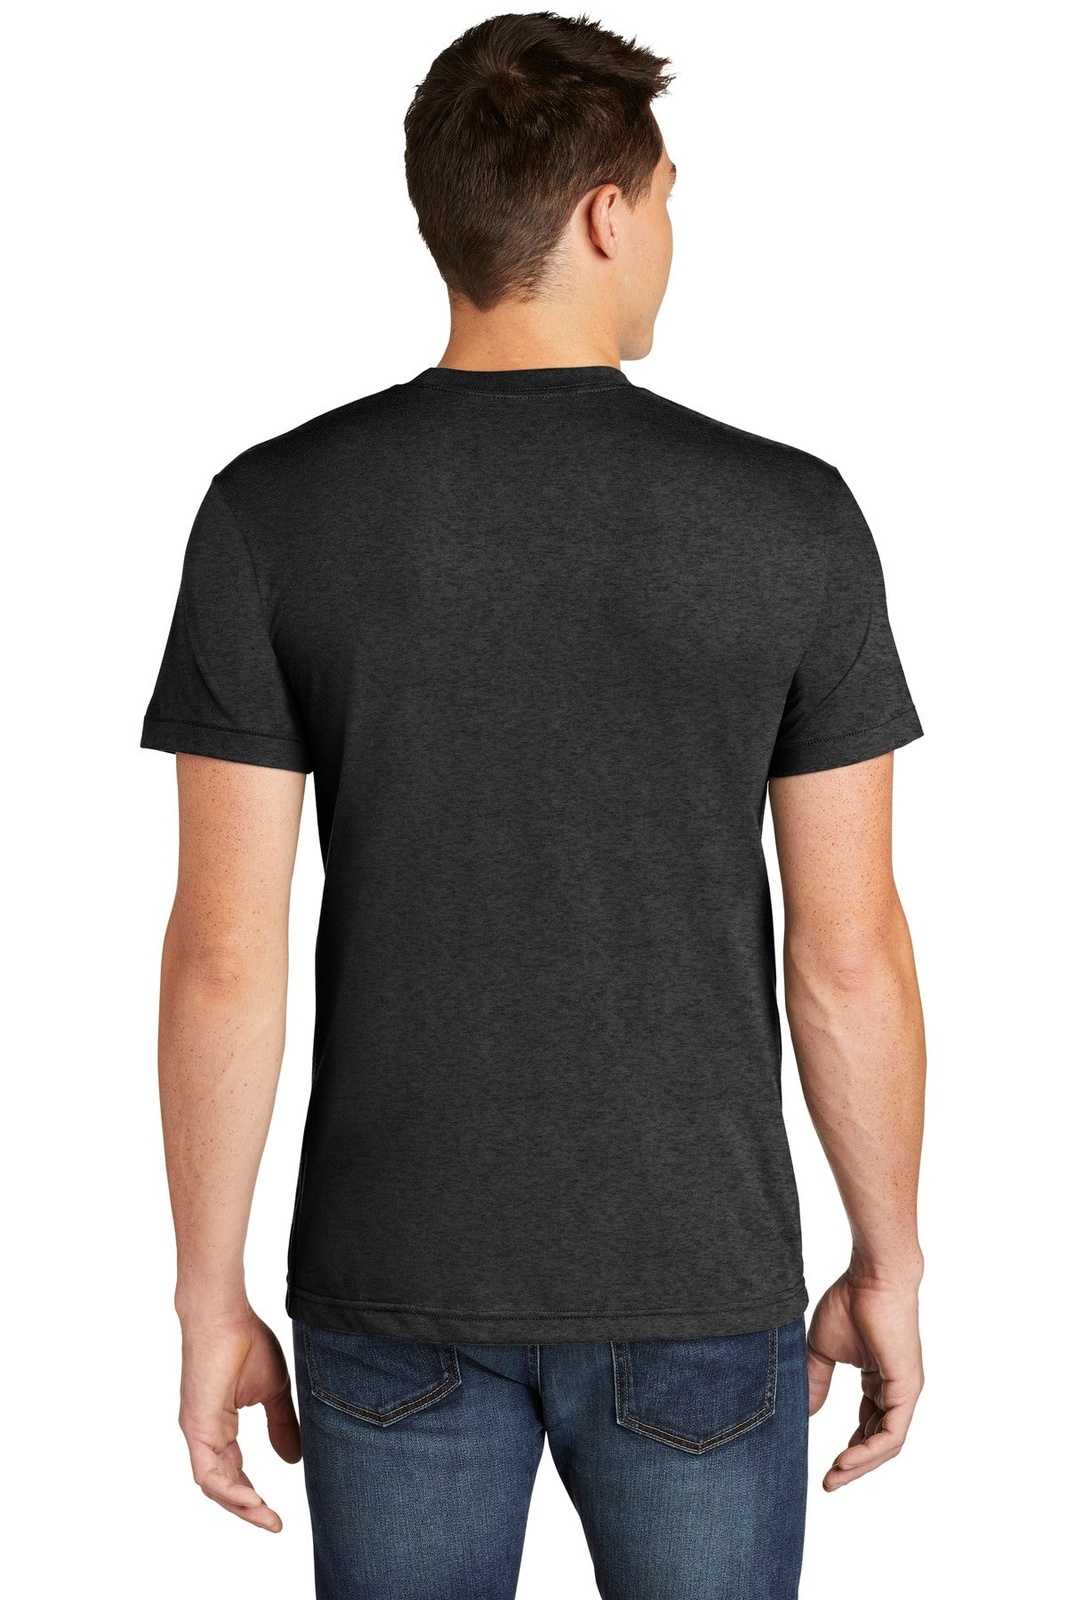 American Apparel BB401W Poly-Cotton T-Shirt - Heather Black - HIT a Double